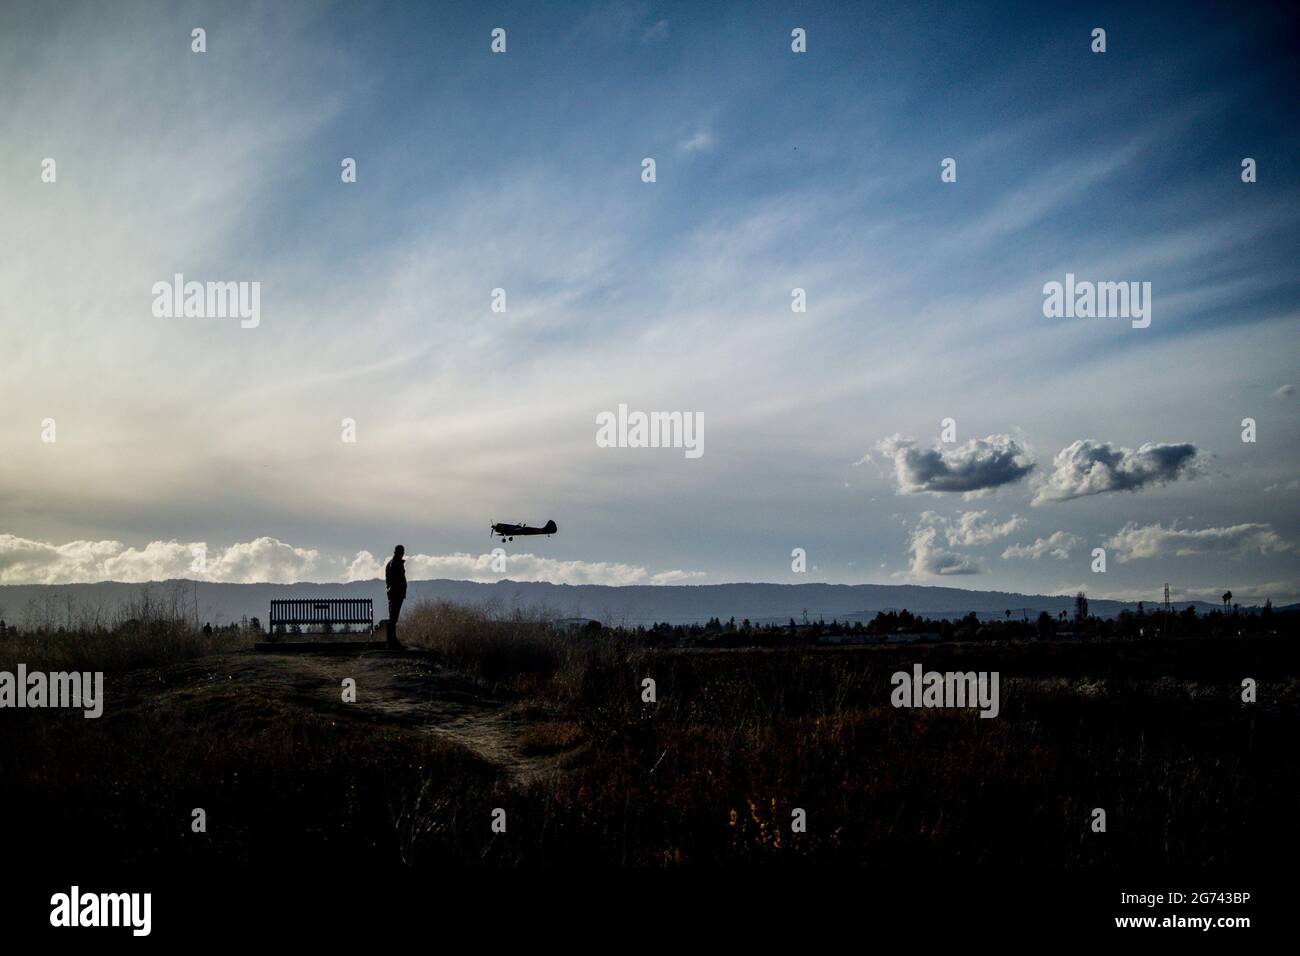 Silhouette of a man standing by a bench with a small airplane flying low, just above his head, mountains on the horizon, blue sky with clouds Stock Photo